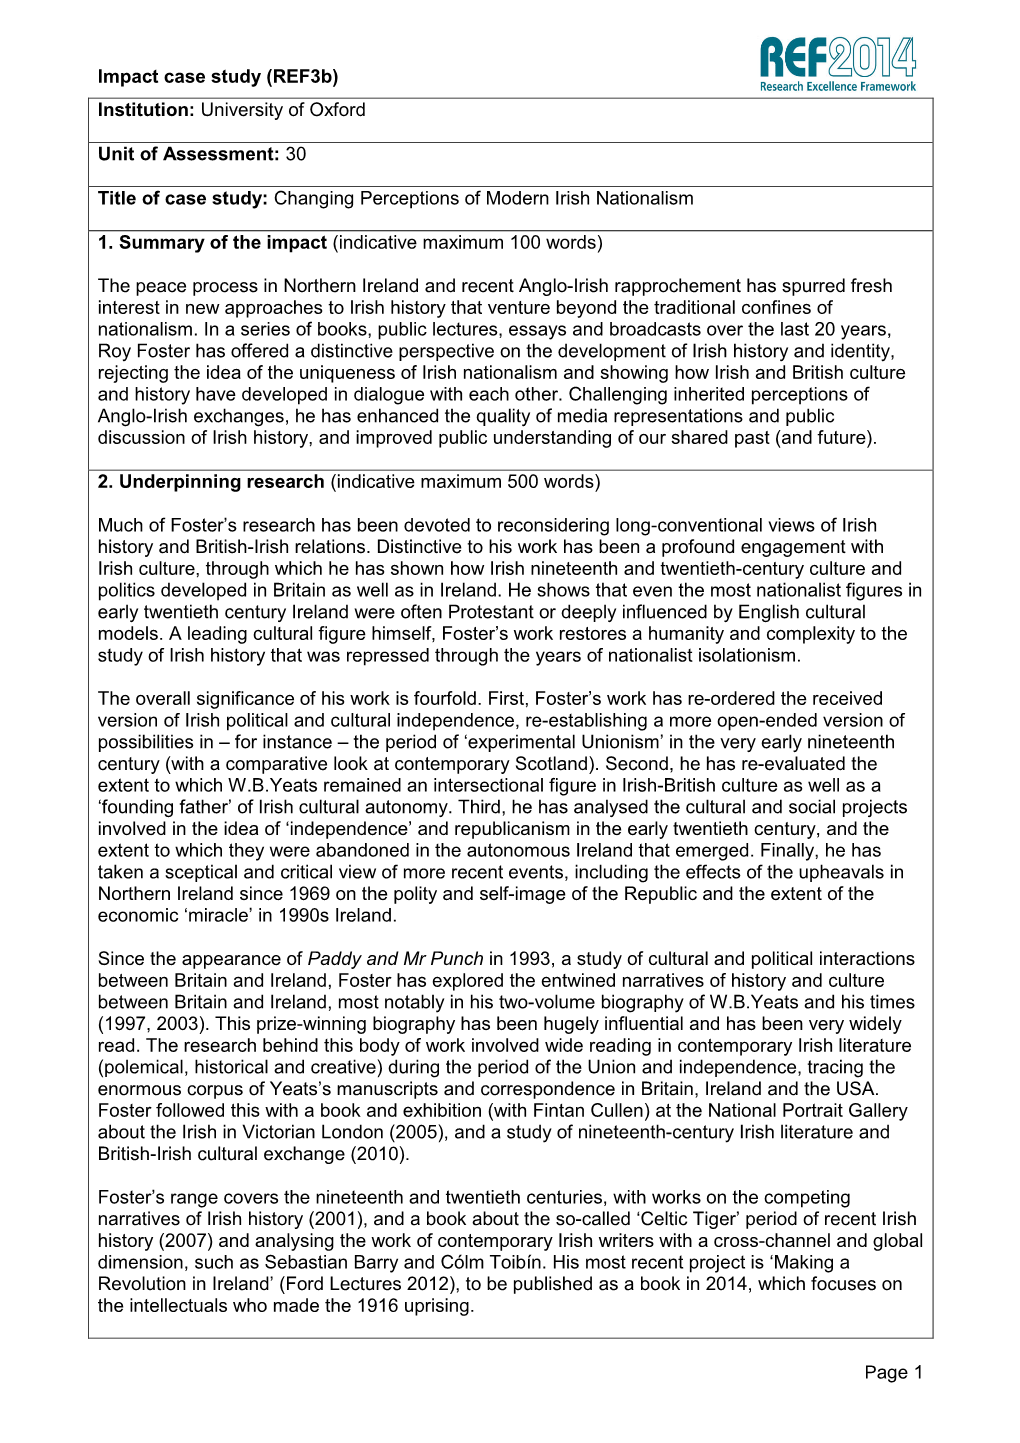 Impact Case Study (Ref3b) Page 1 Institution: University of Oxford Unit